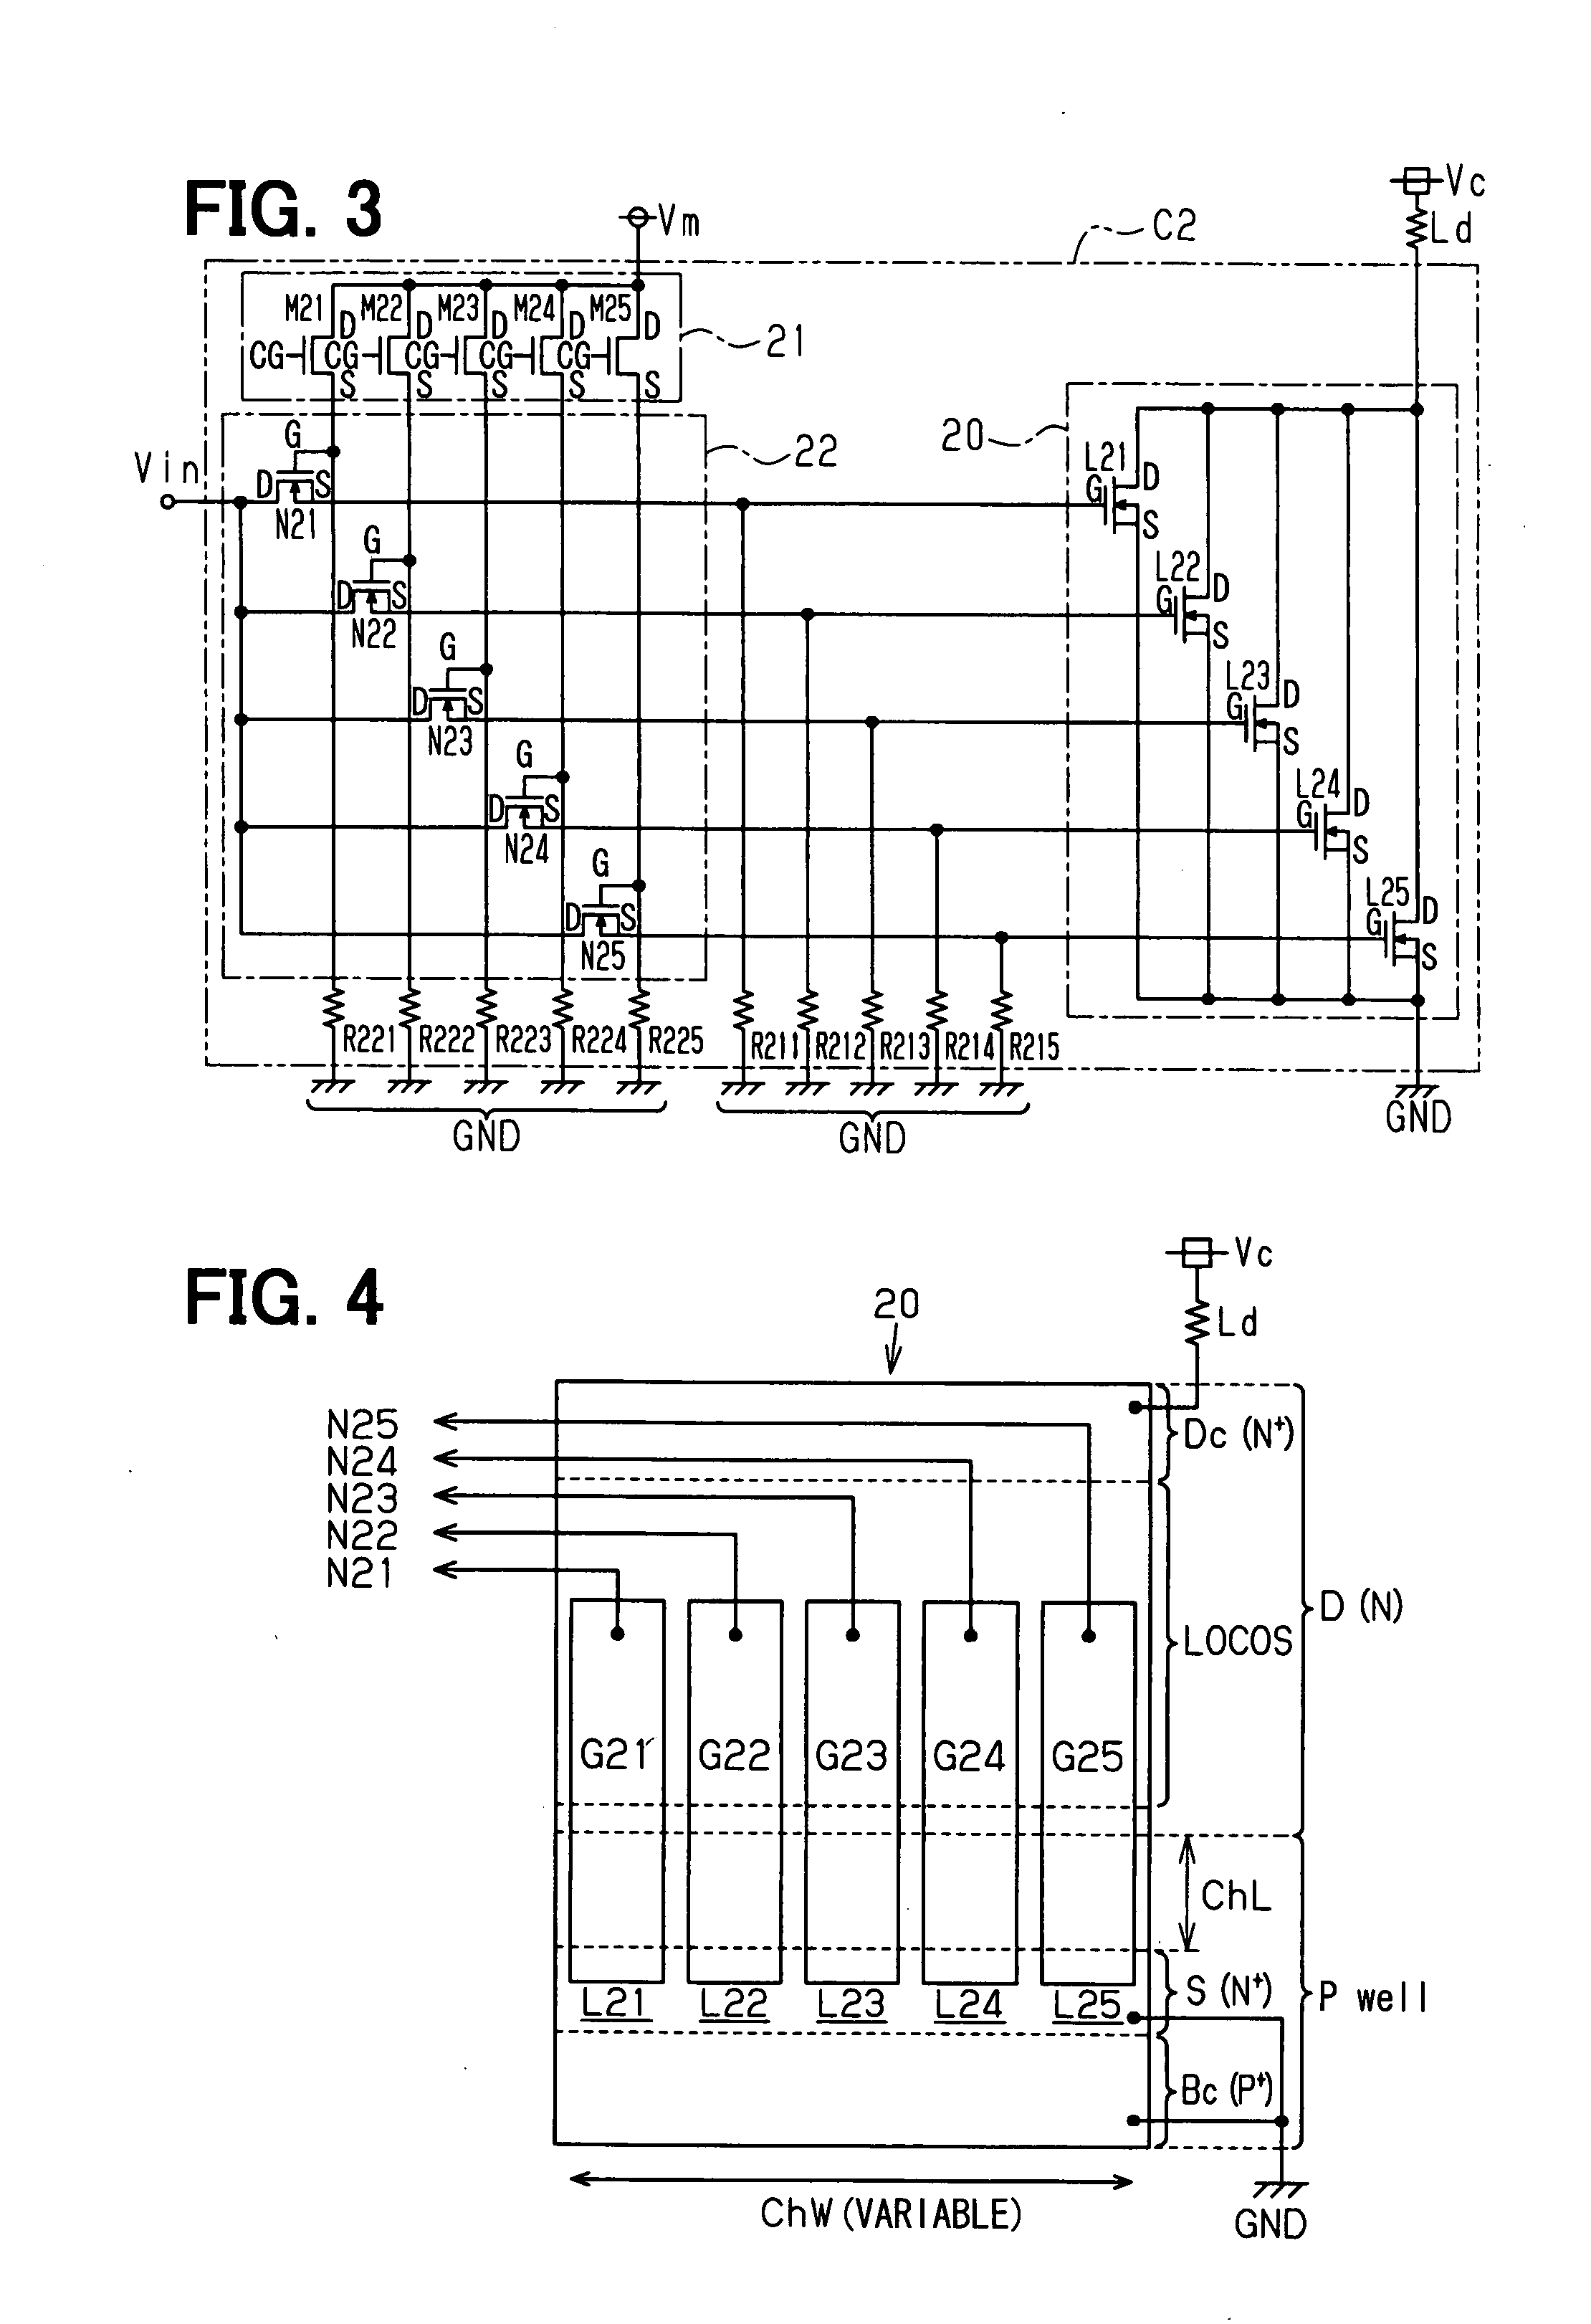 Semiconductor device having variable operating information